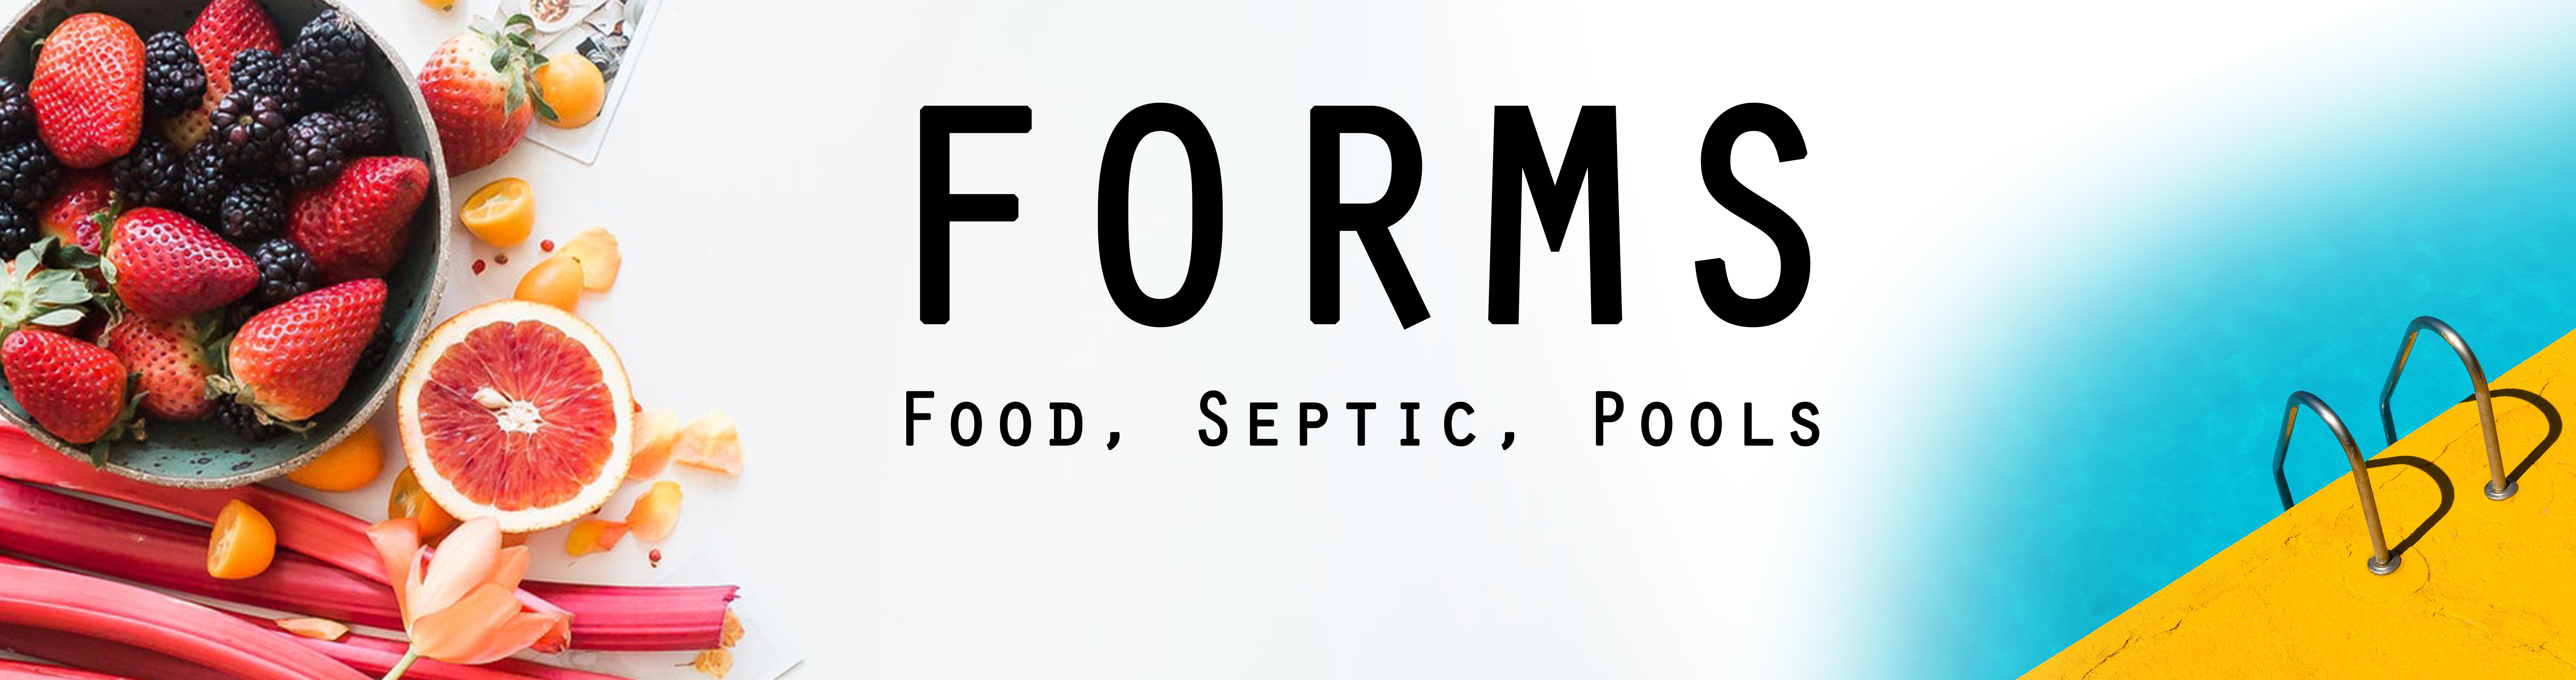 Forms for Food, Septics and Pools Banner